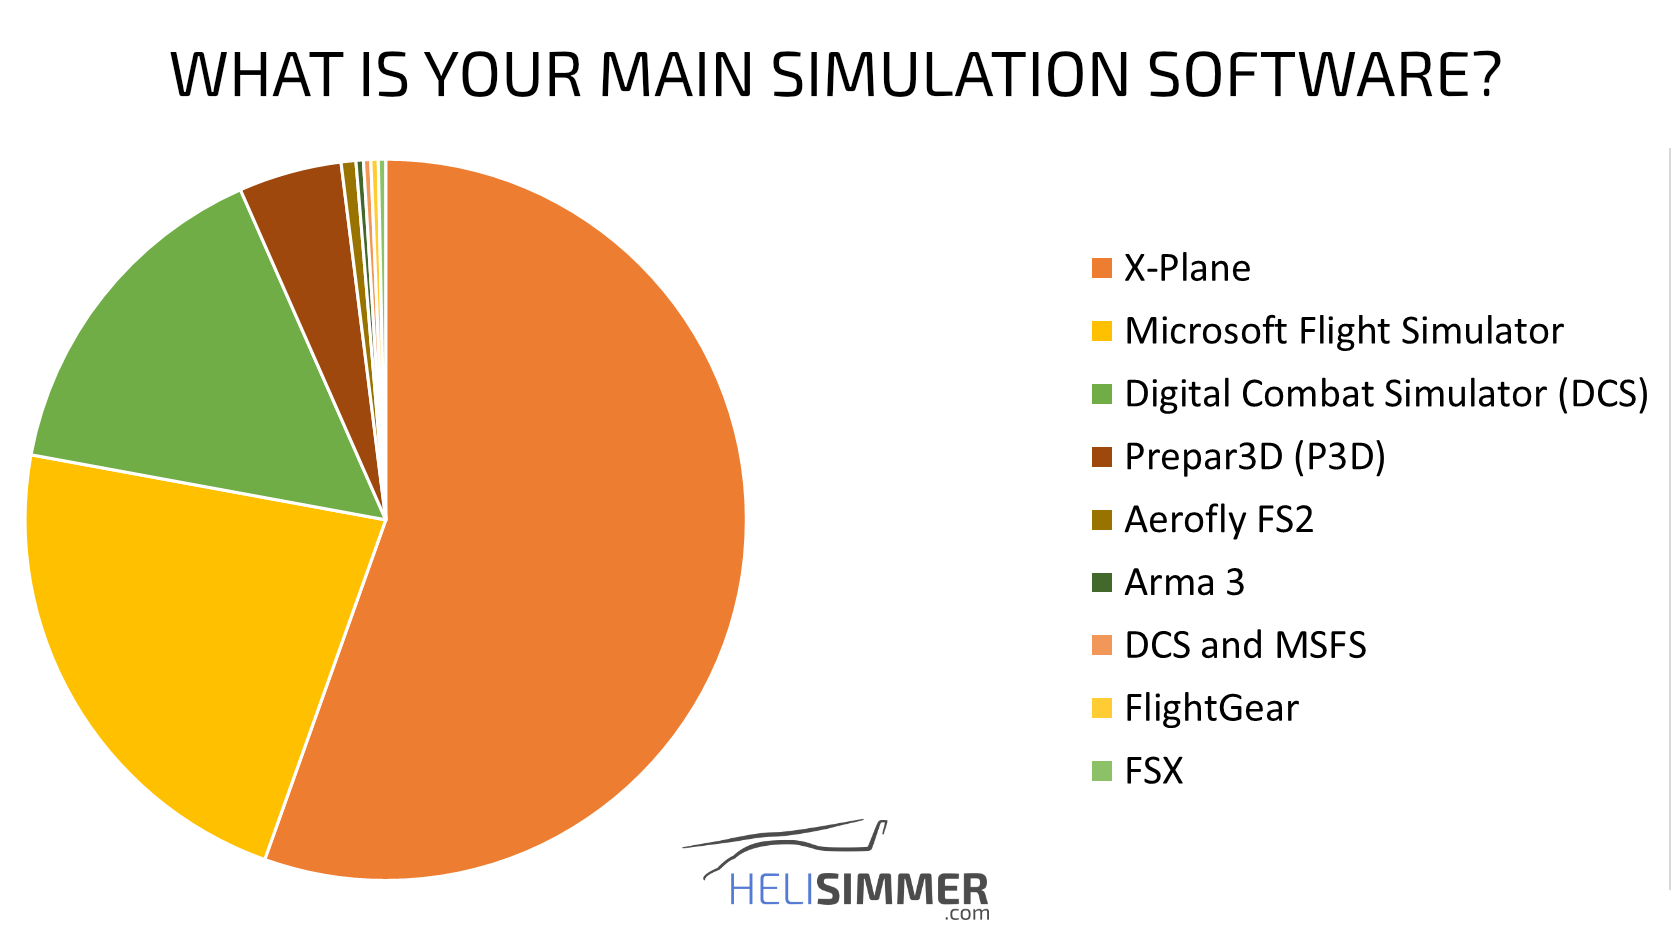 HeliSimmer.com - The most used sim